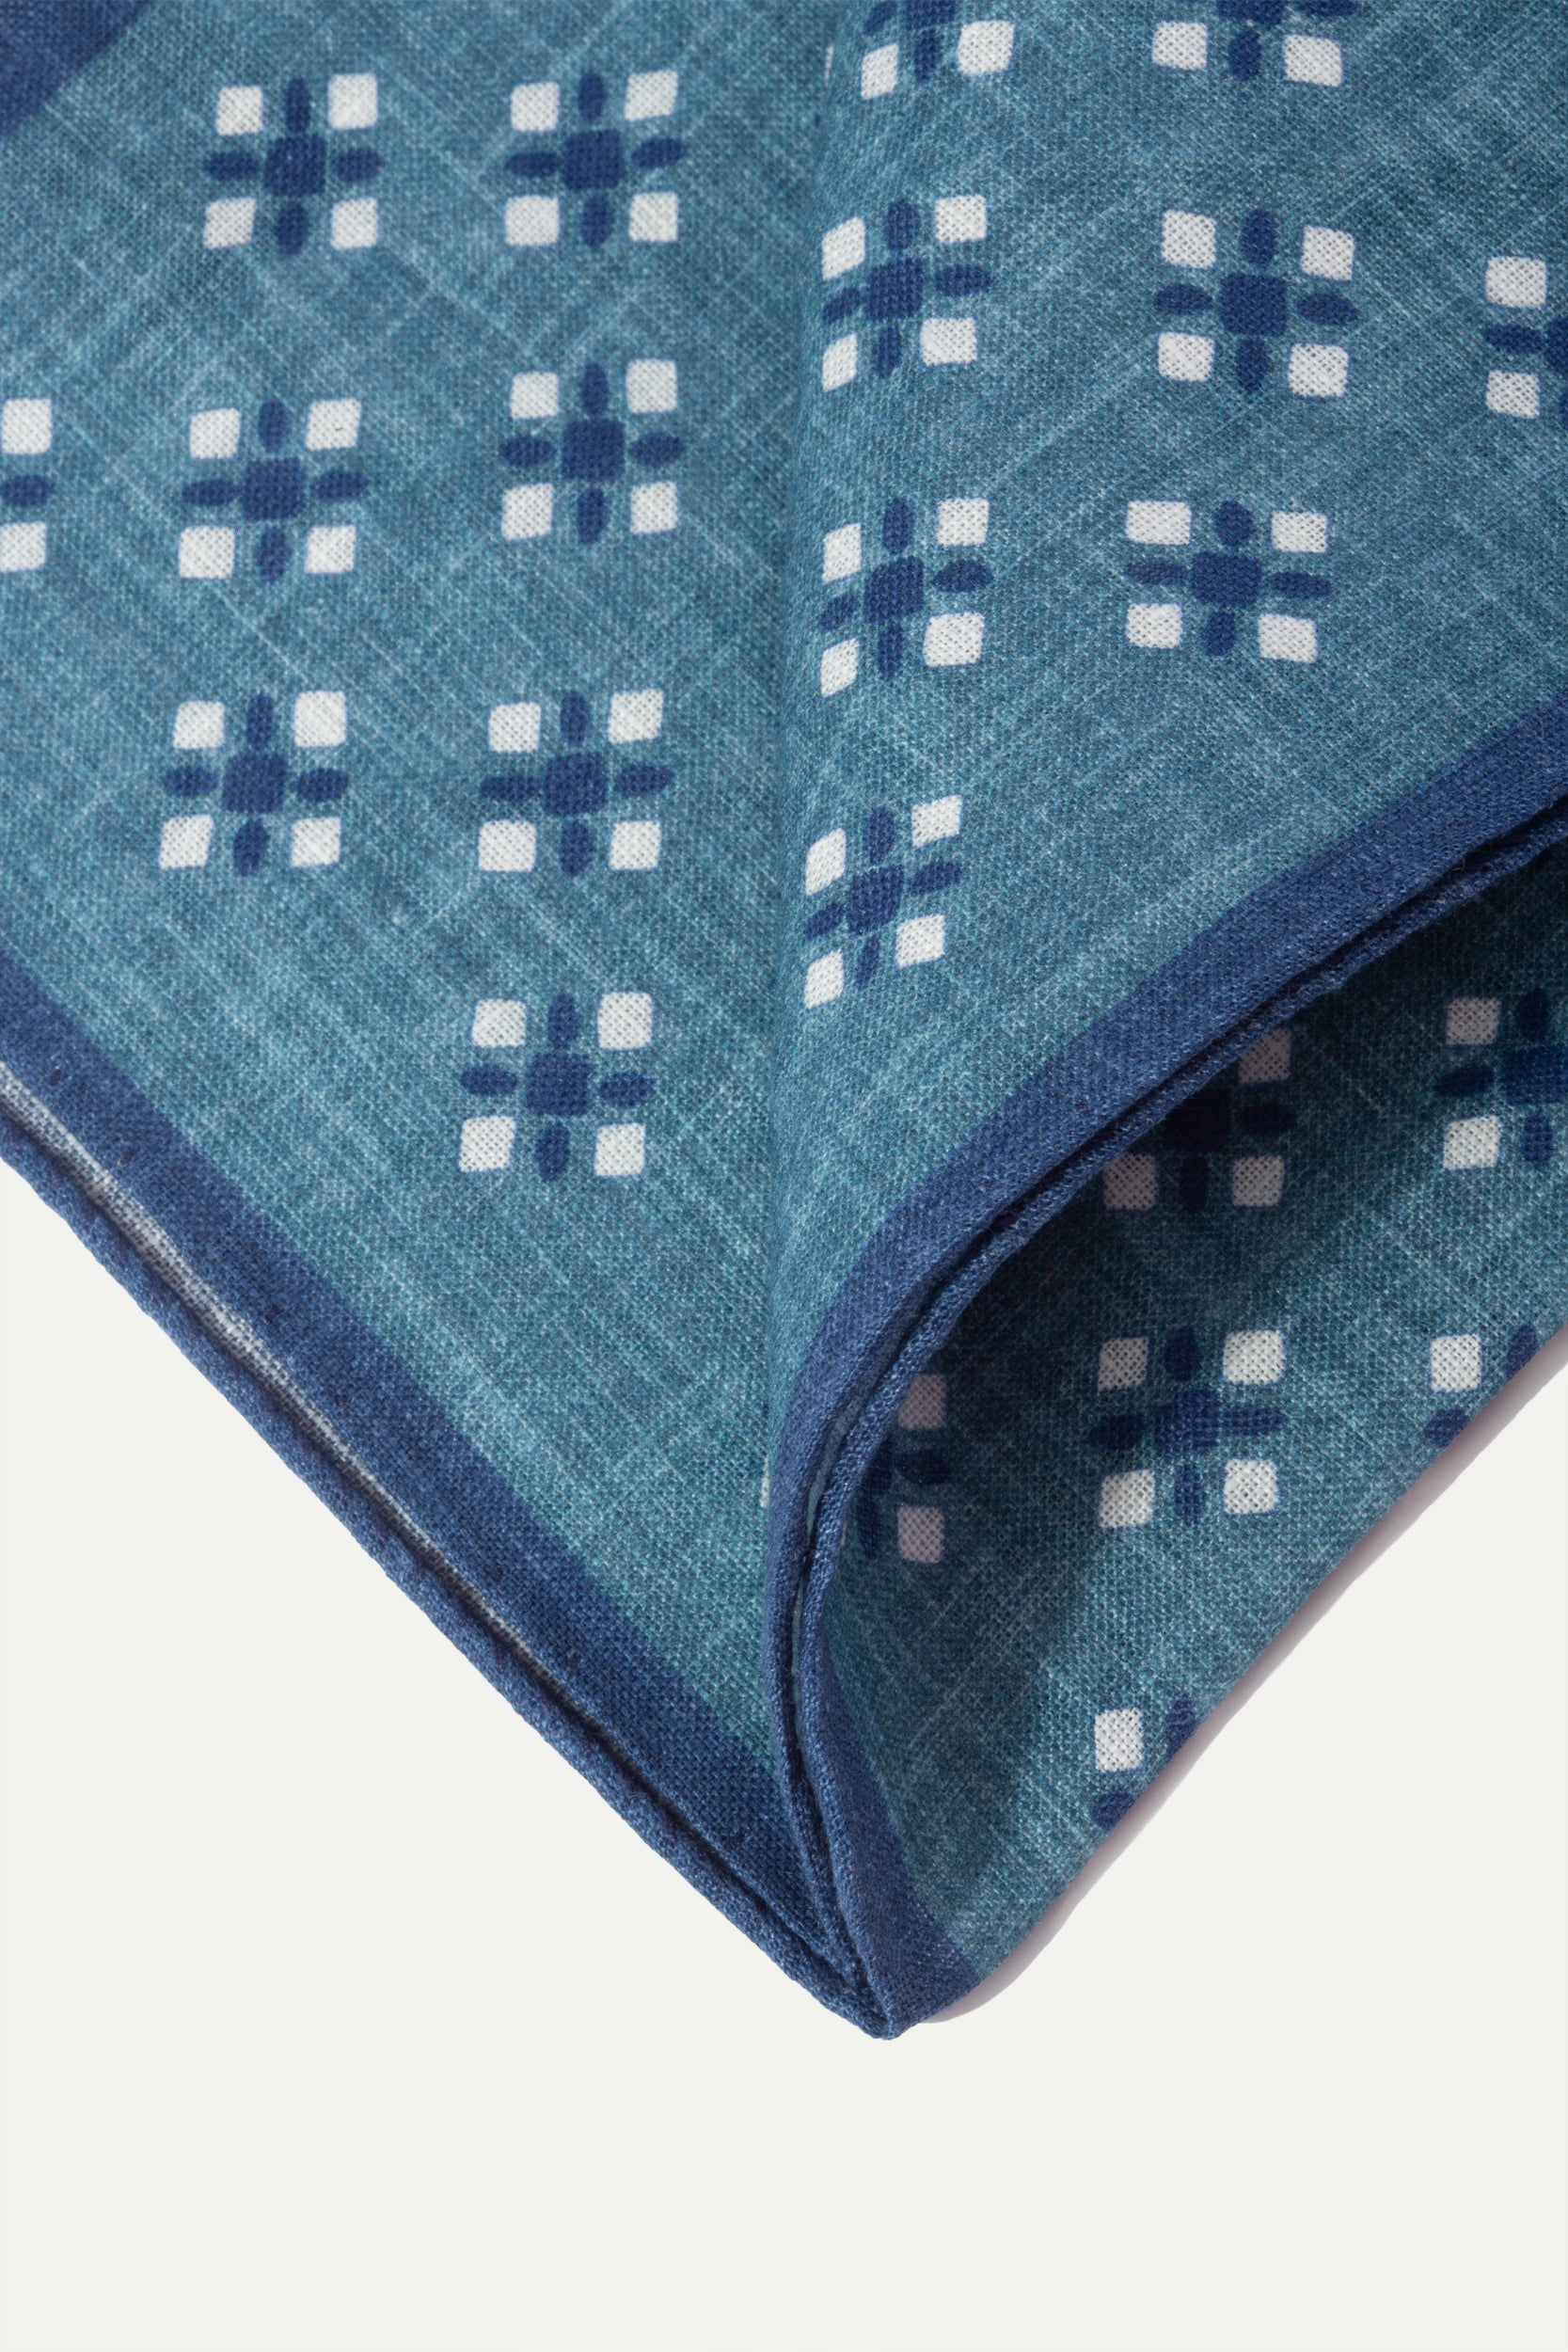 Green fancy reversible pocket square - Made in Italy